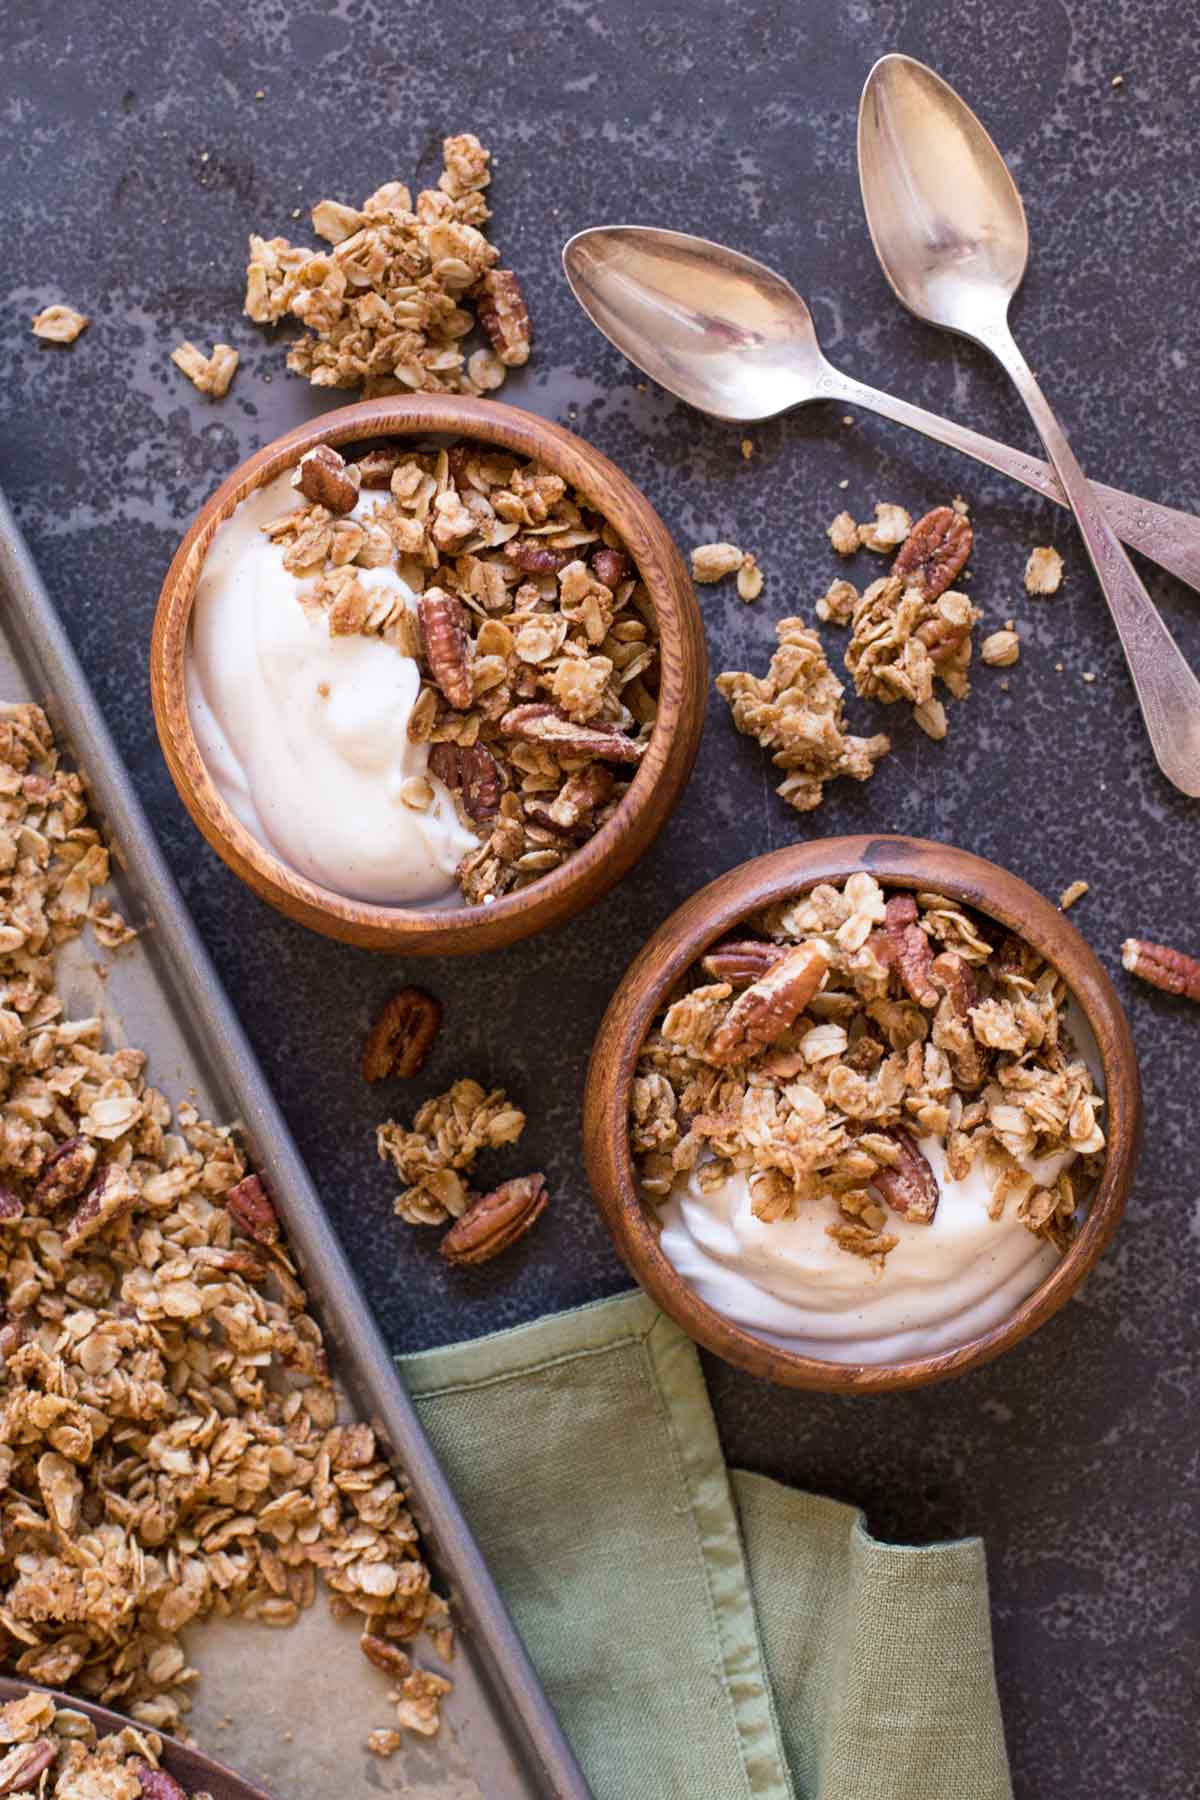 Two bowls of yogurt and Gingerbread Spice Granola, with two spoons next to them.  